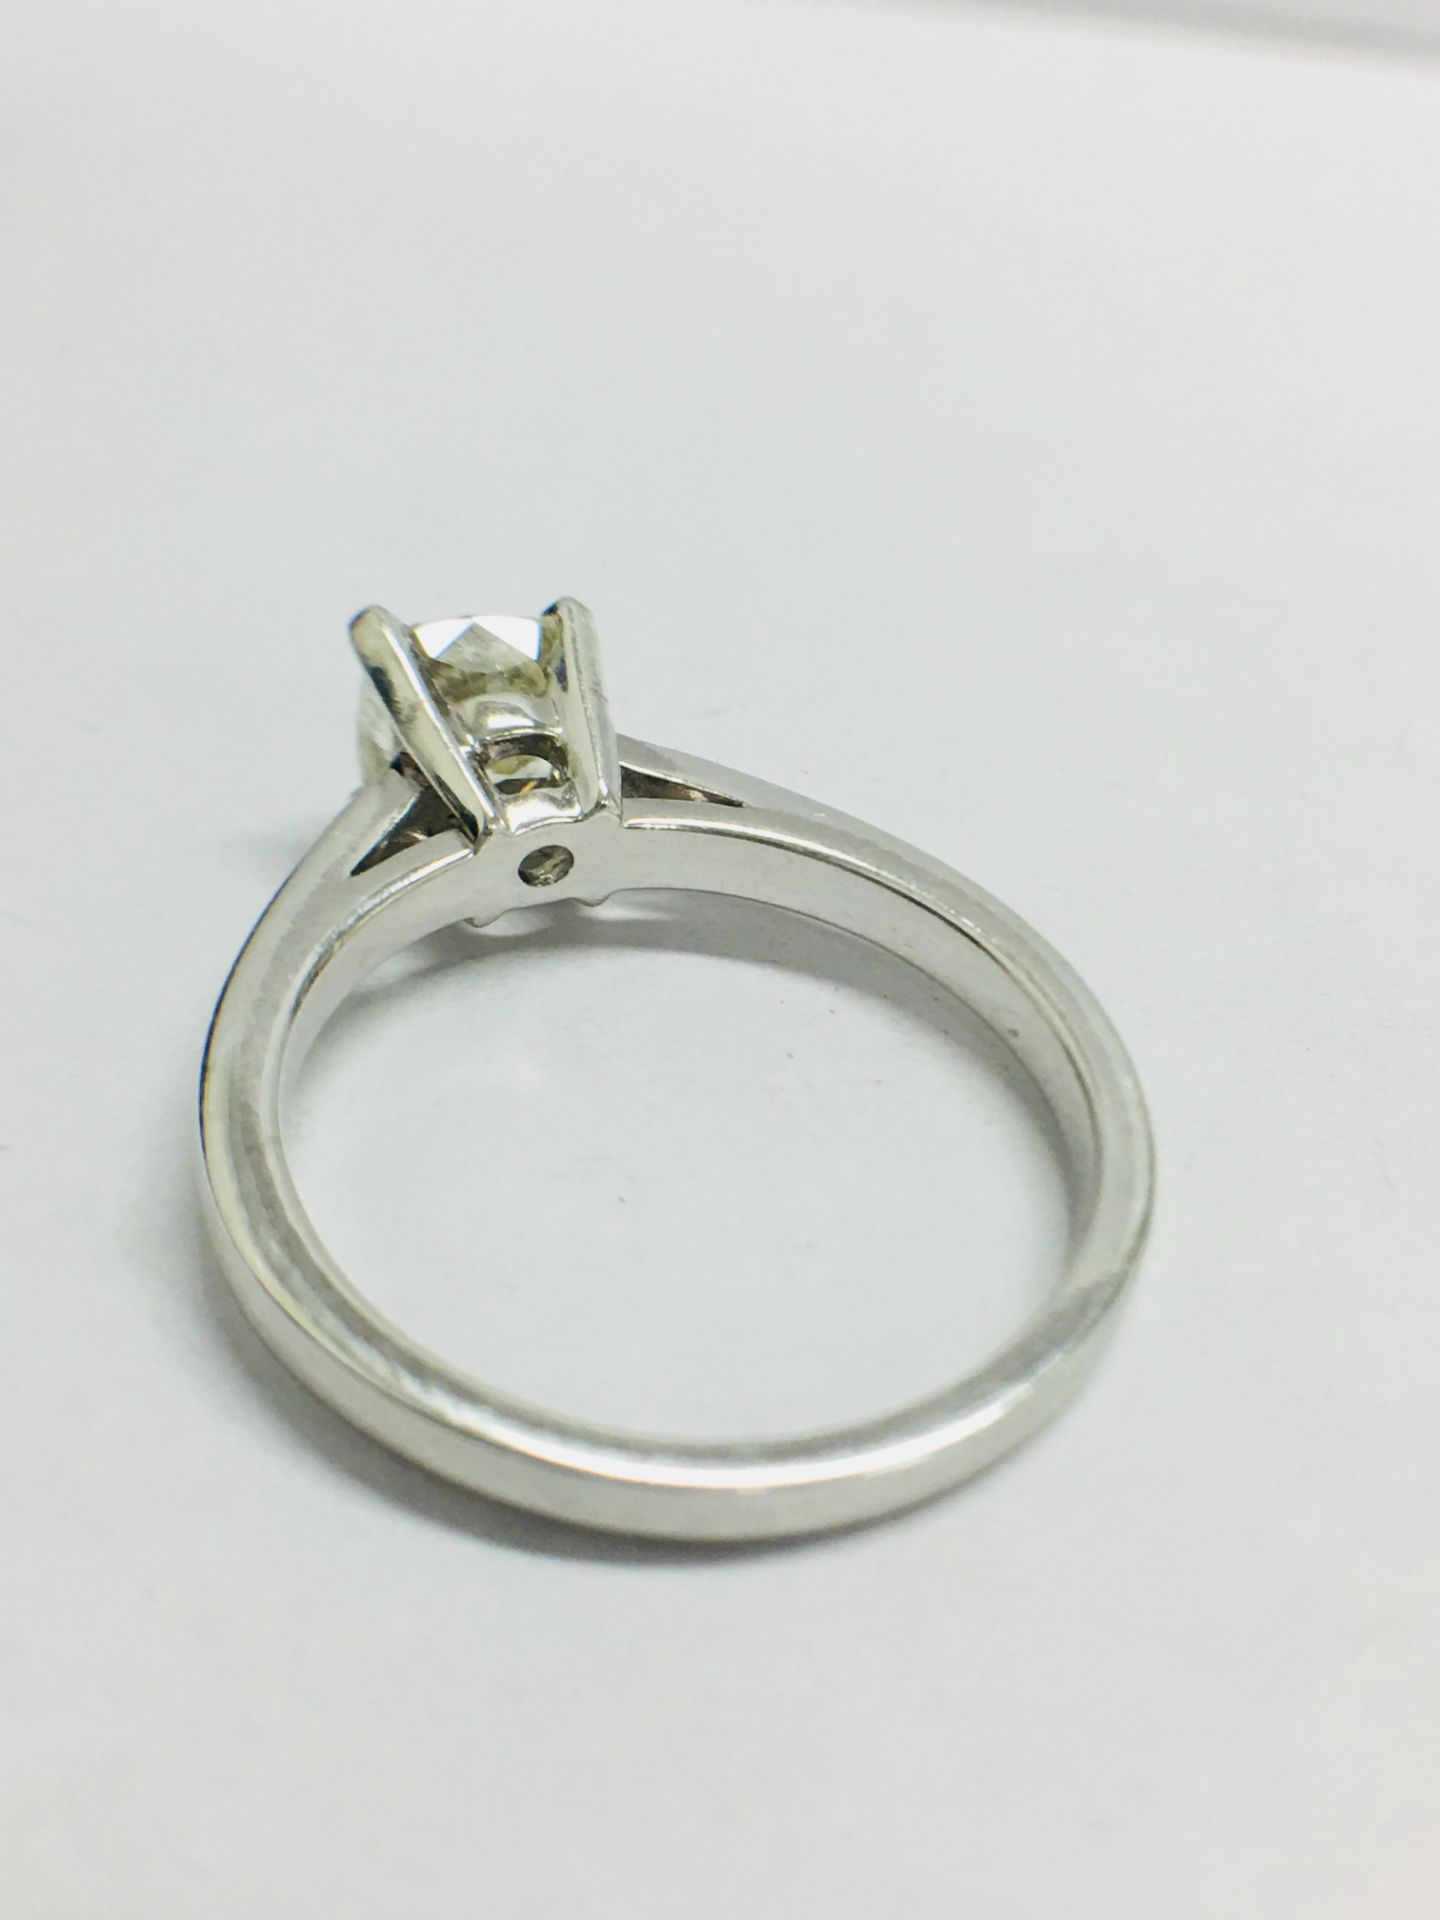 1.00ct diamond solitaire ring with a Cushion cut diamond. J colour and I1 clarity enhanced stone. - Image 5 of 7